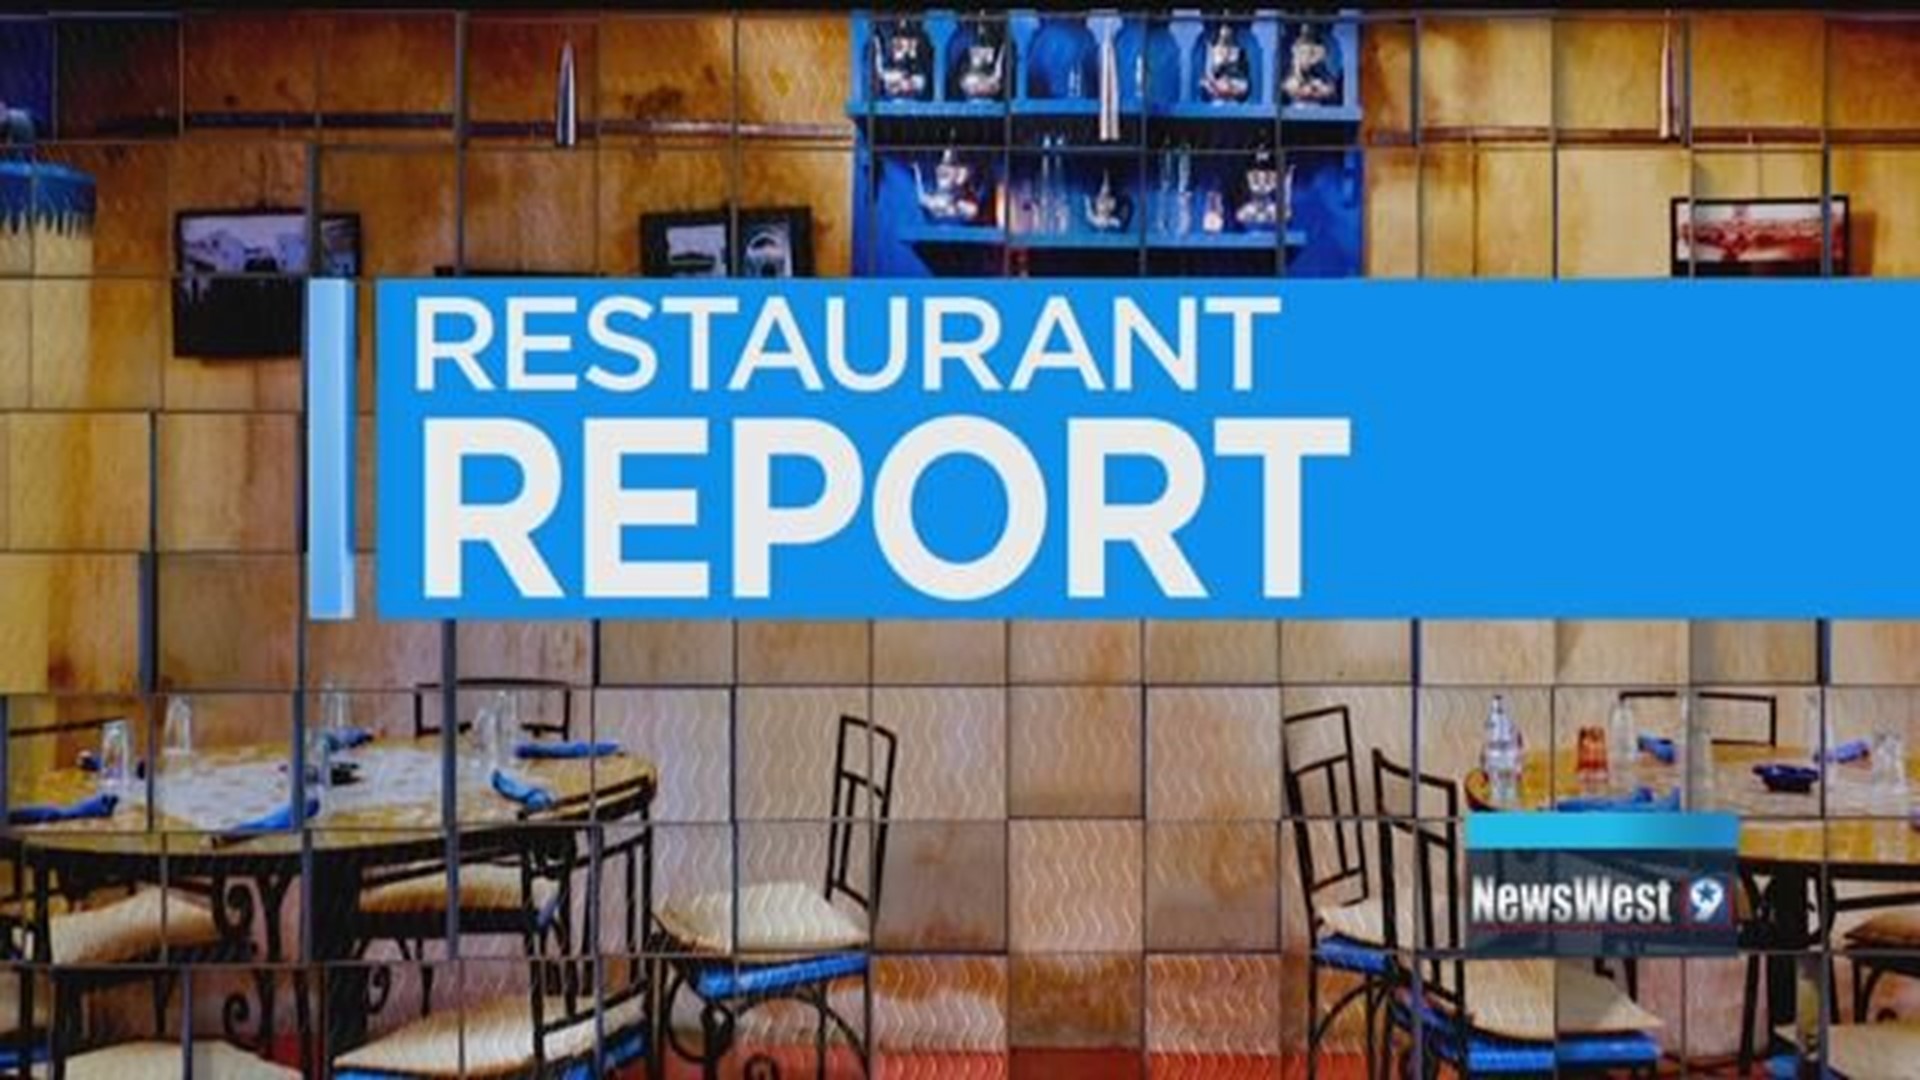 Restaurant Report: 2 low performers in Odessa, no Midland reports